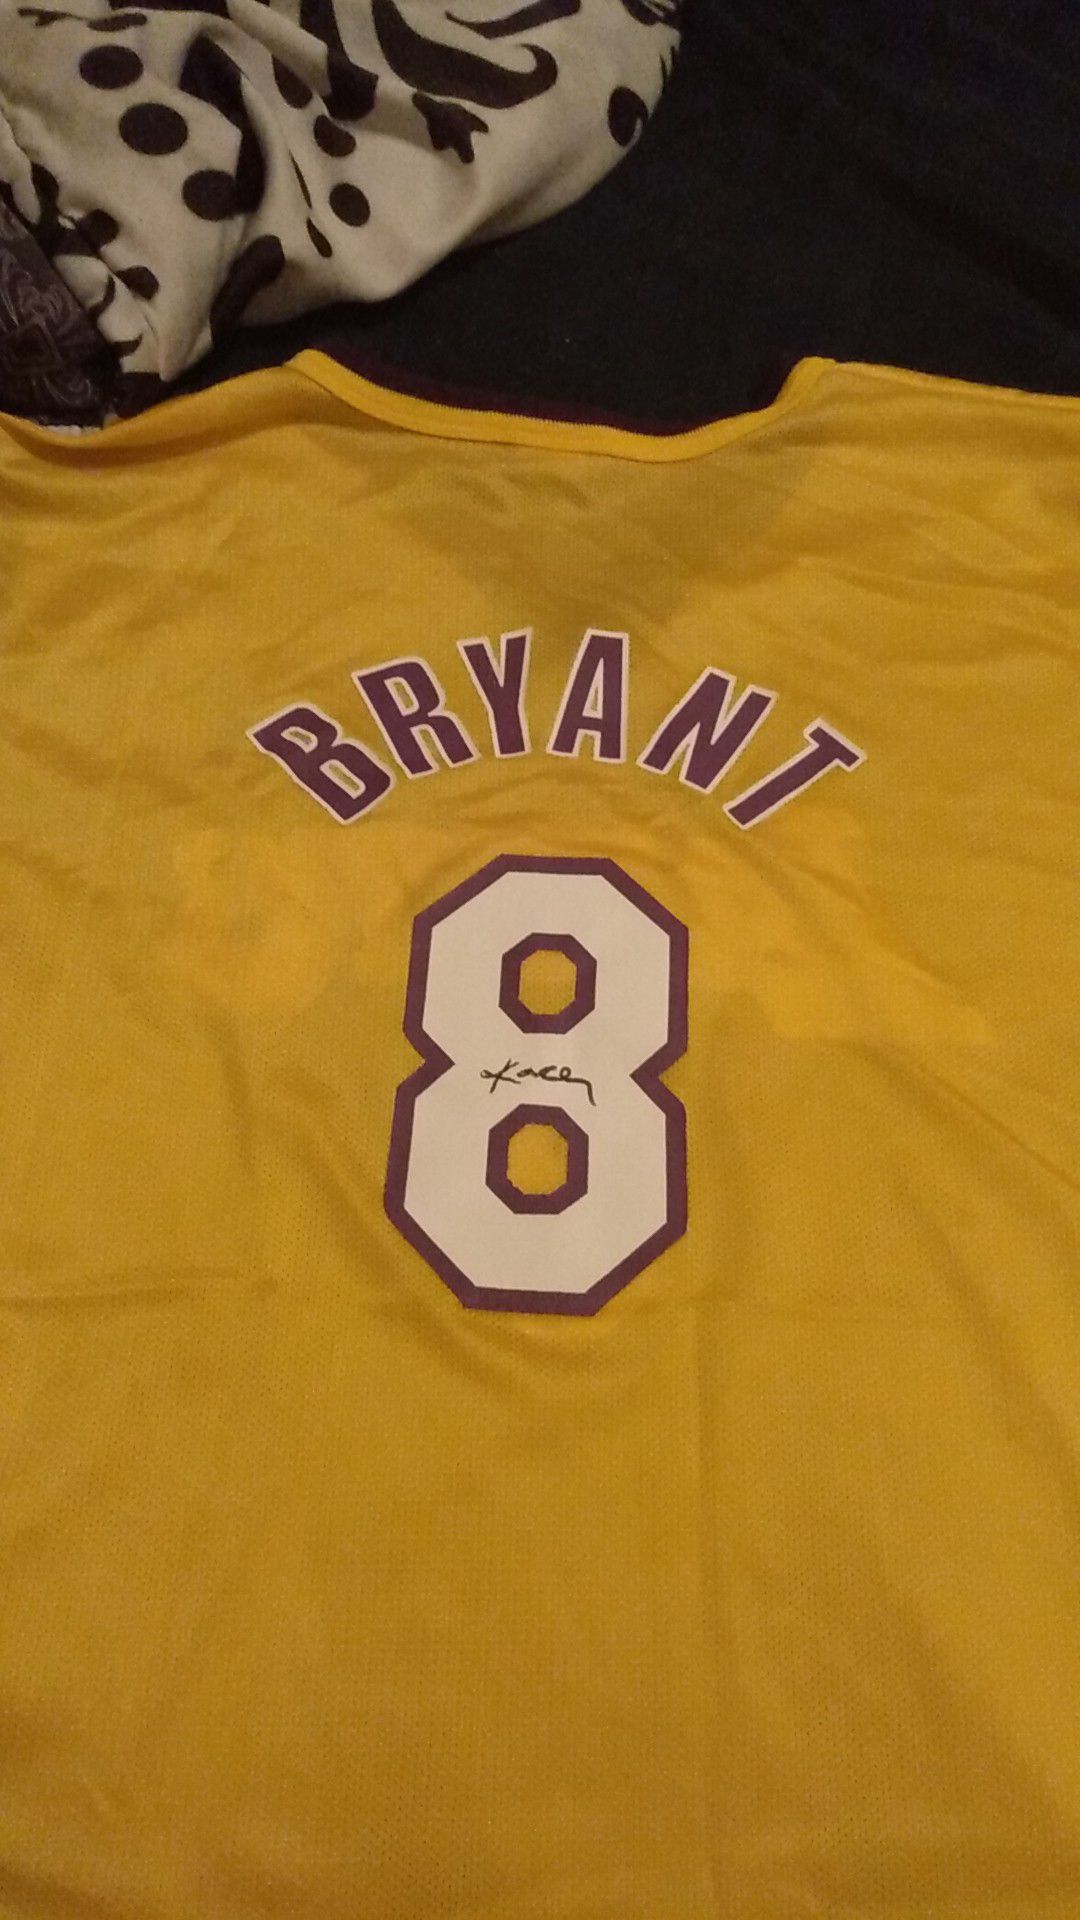 Kobe Bryant rookie jersey signed\autographed